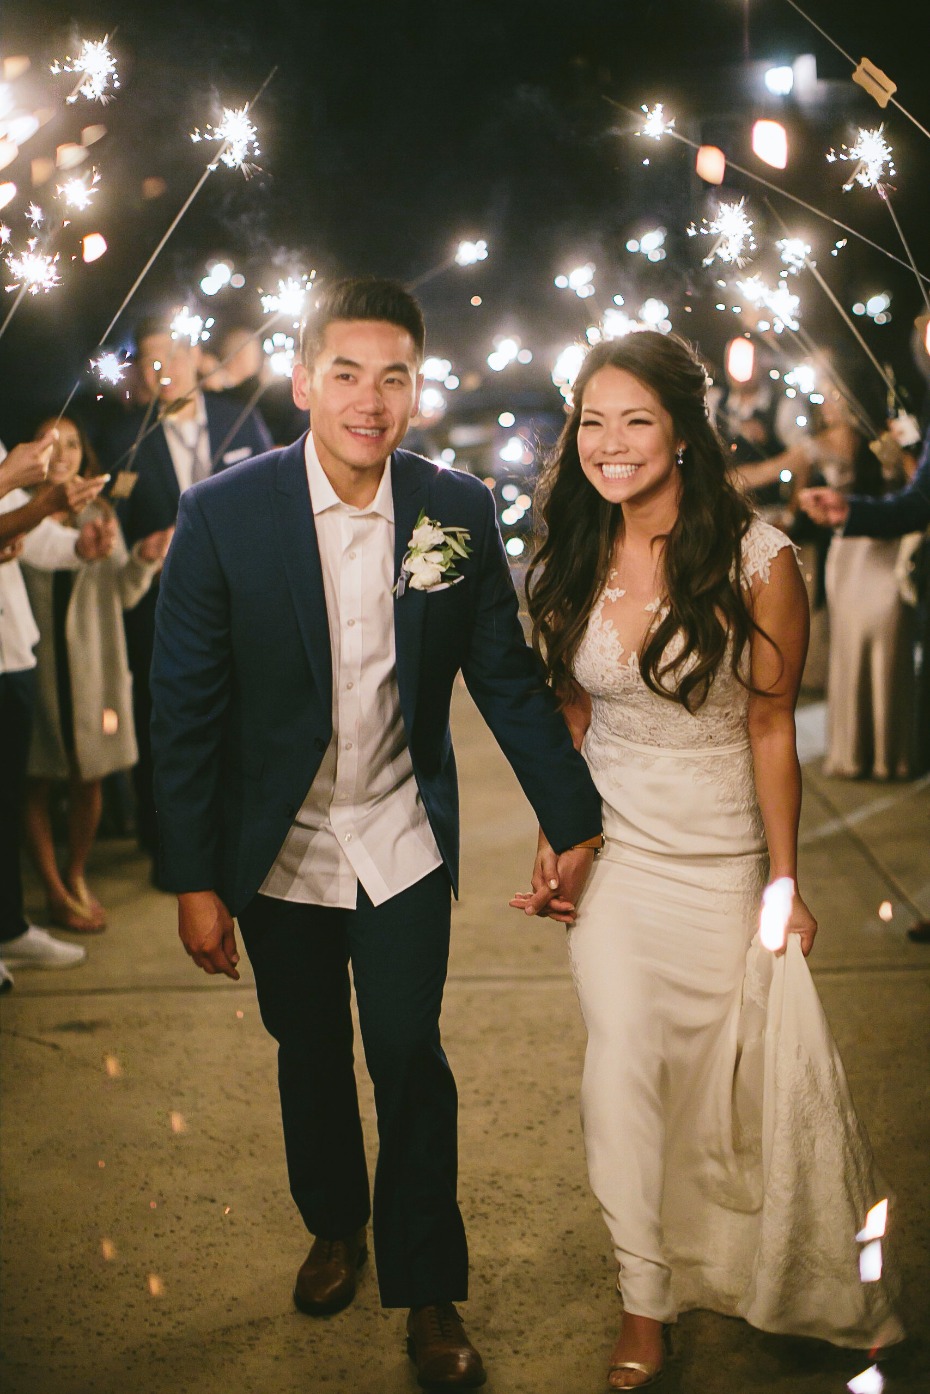 magical sparkler exit for the newlyweds